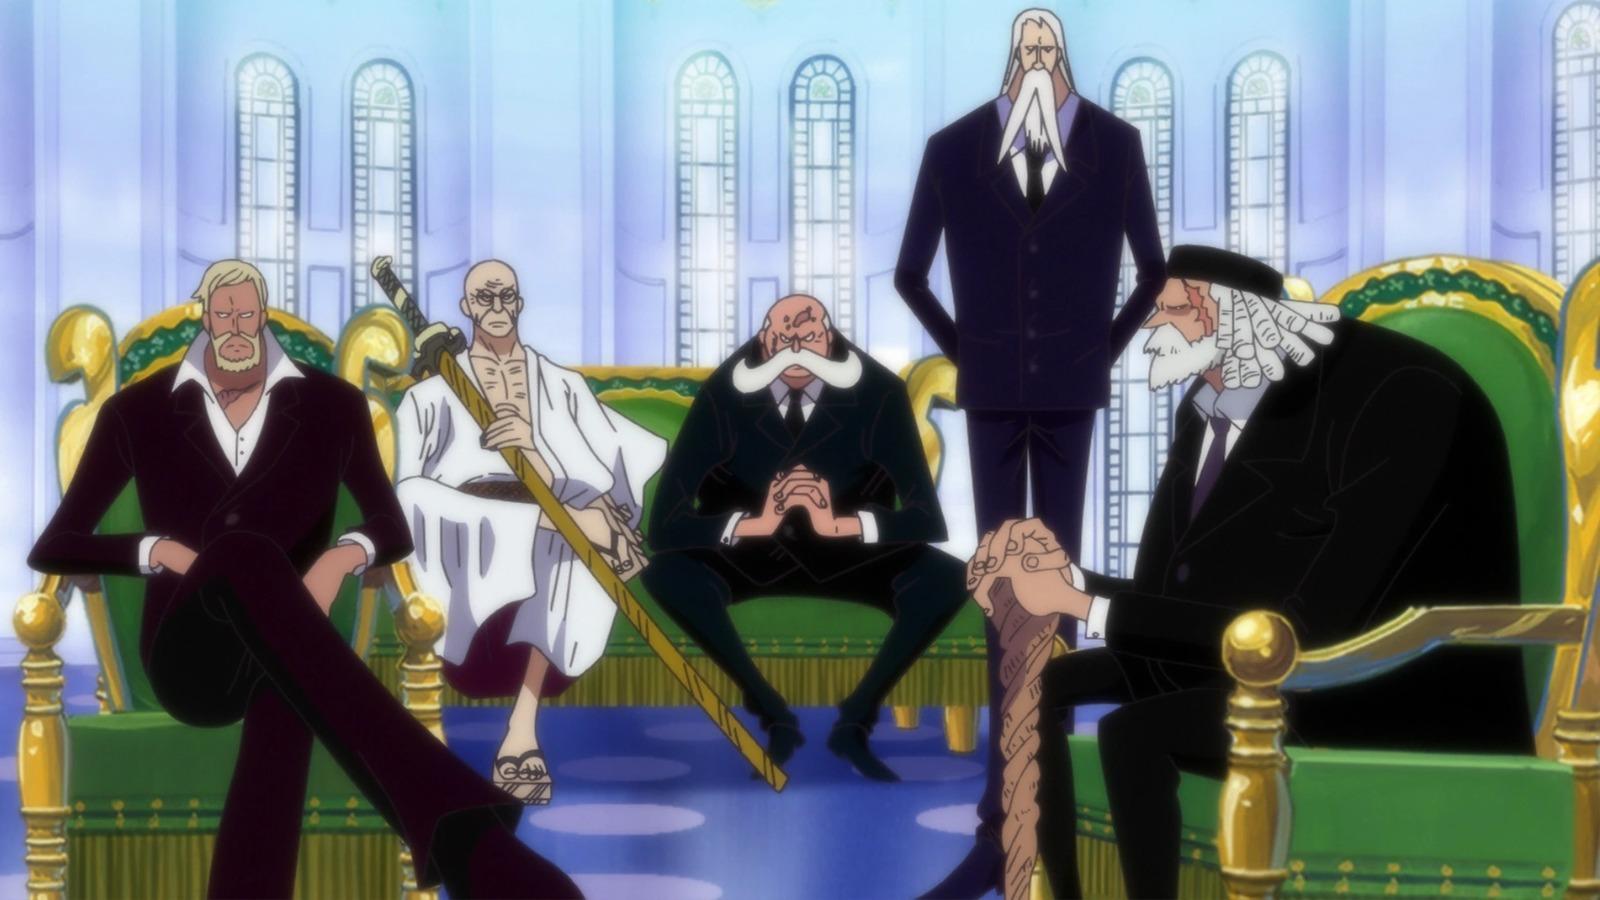 The Gorōsei Secret Powers One Piece Full Episode 1065+ Chapter 1087+ Anime  Analysis ワンピース Insight 